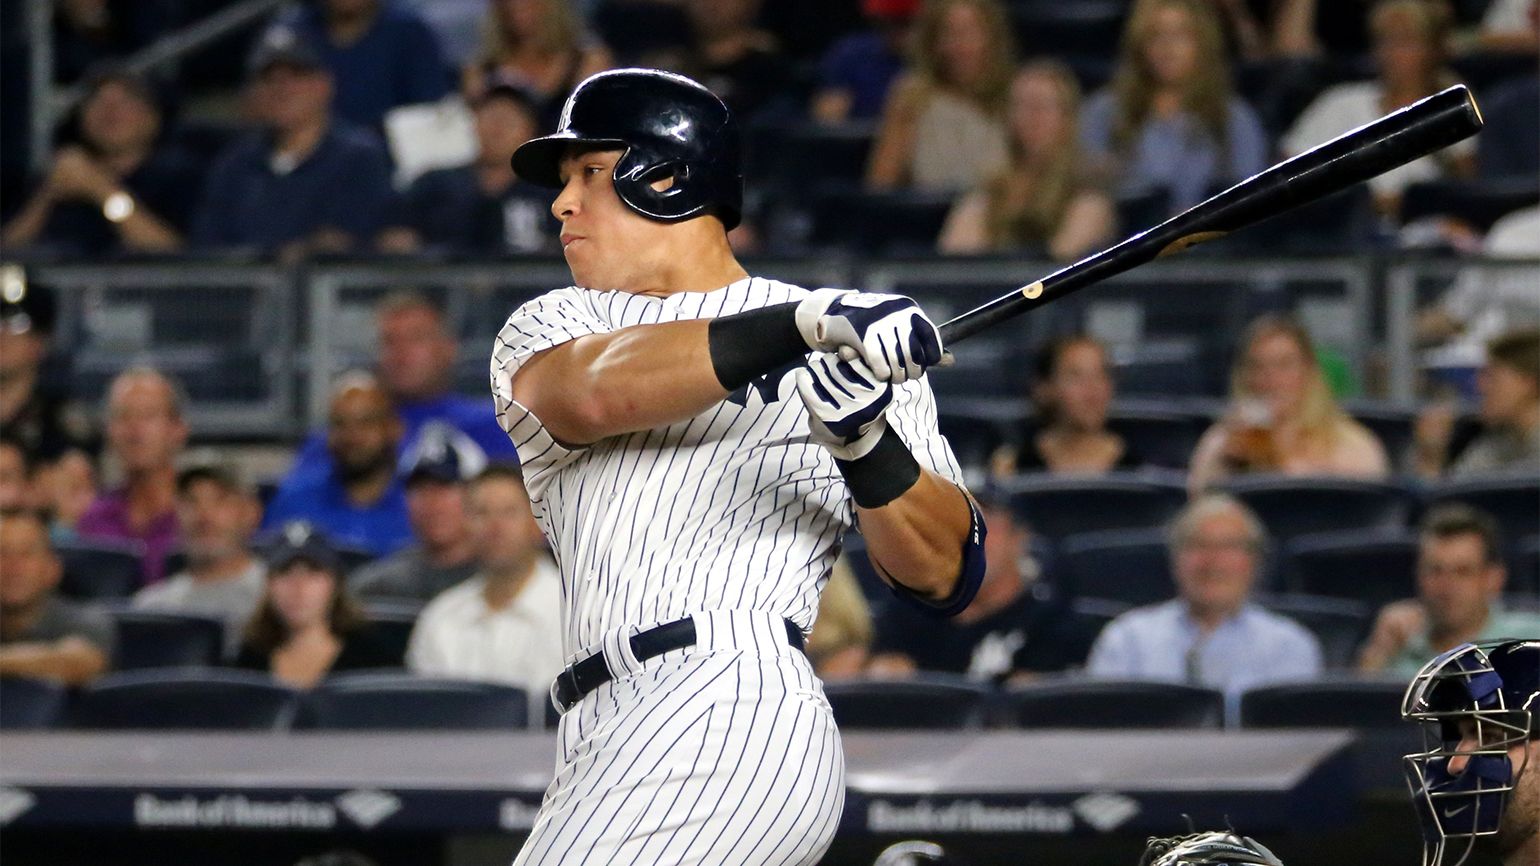 Aaron Judge: Yankees hero is a superstar on the field, but off it